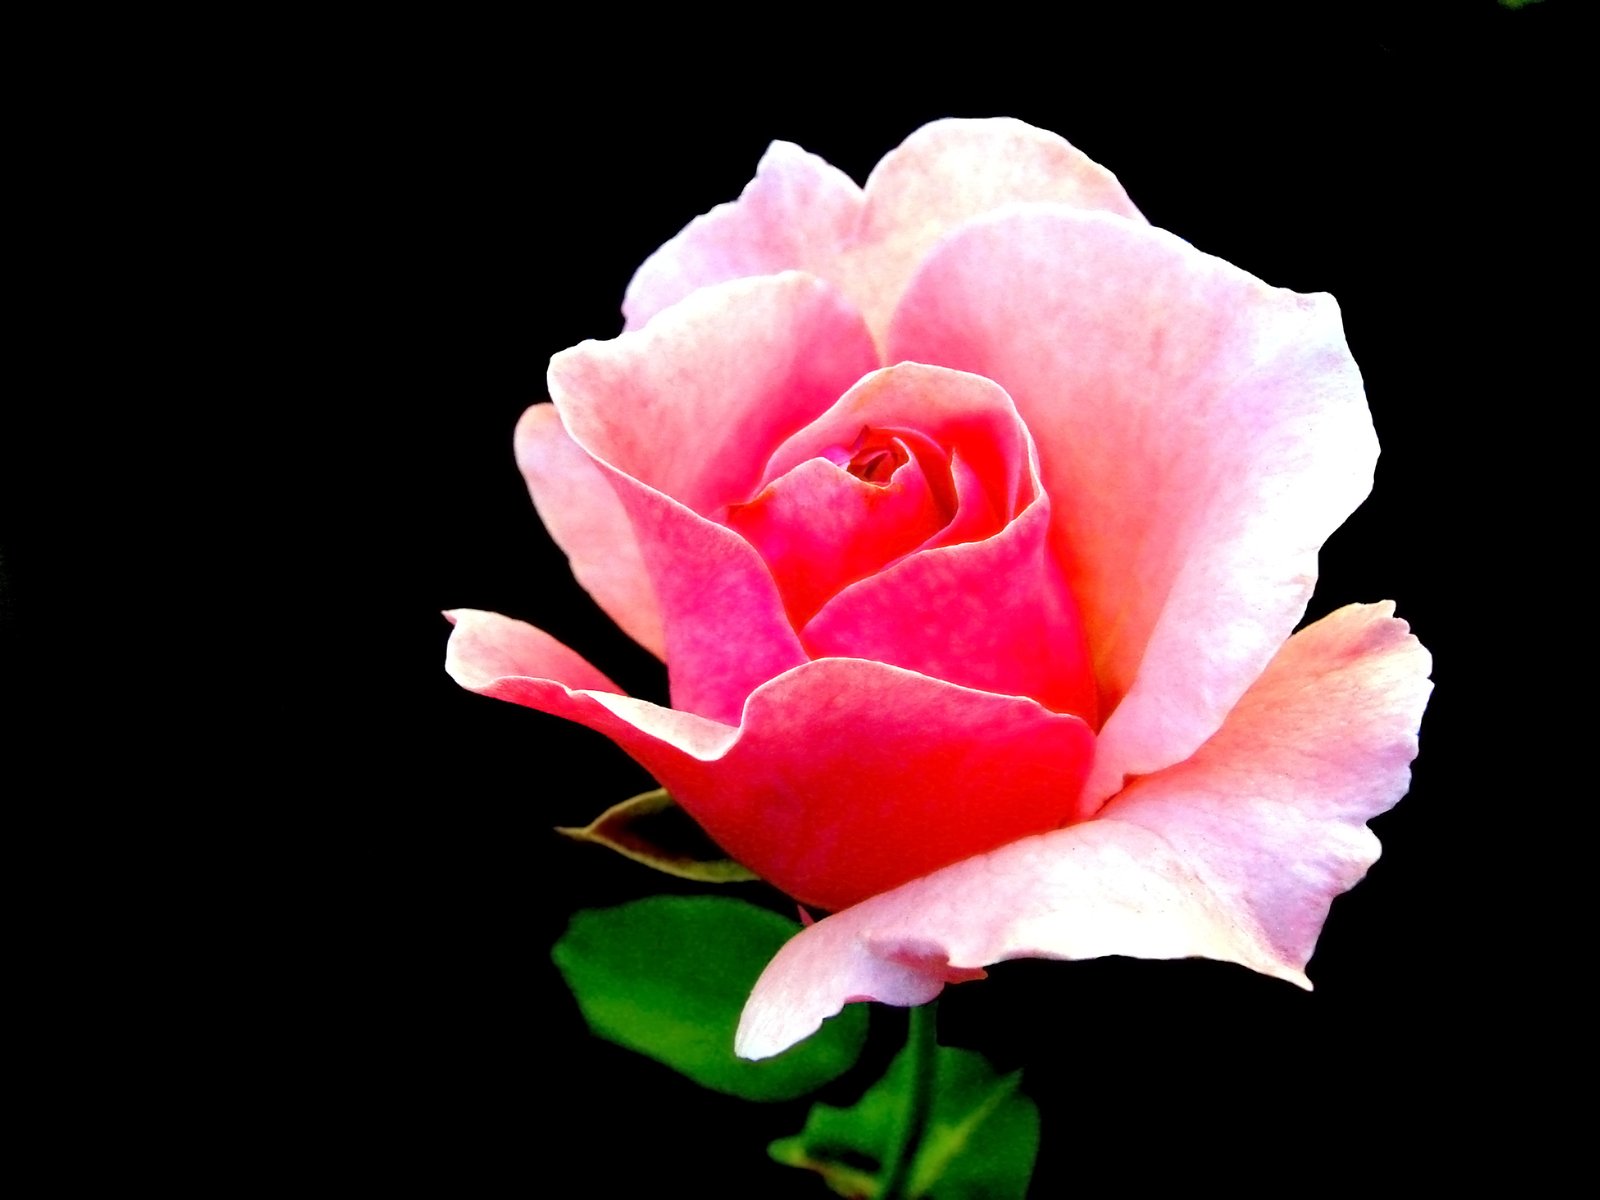 a single pink rose is growing near a black background